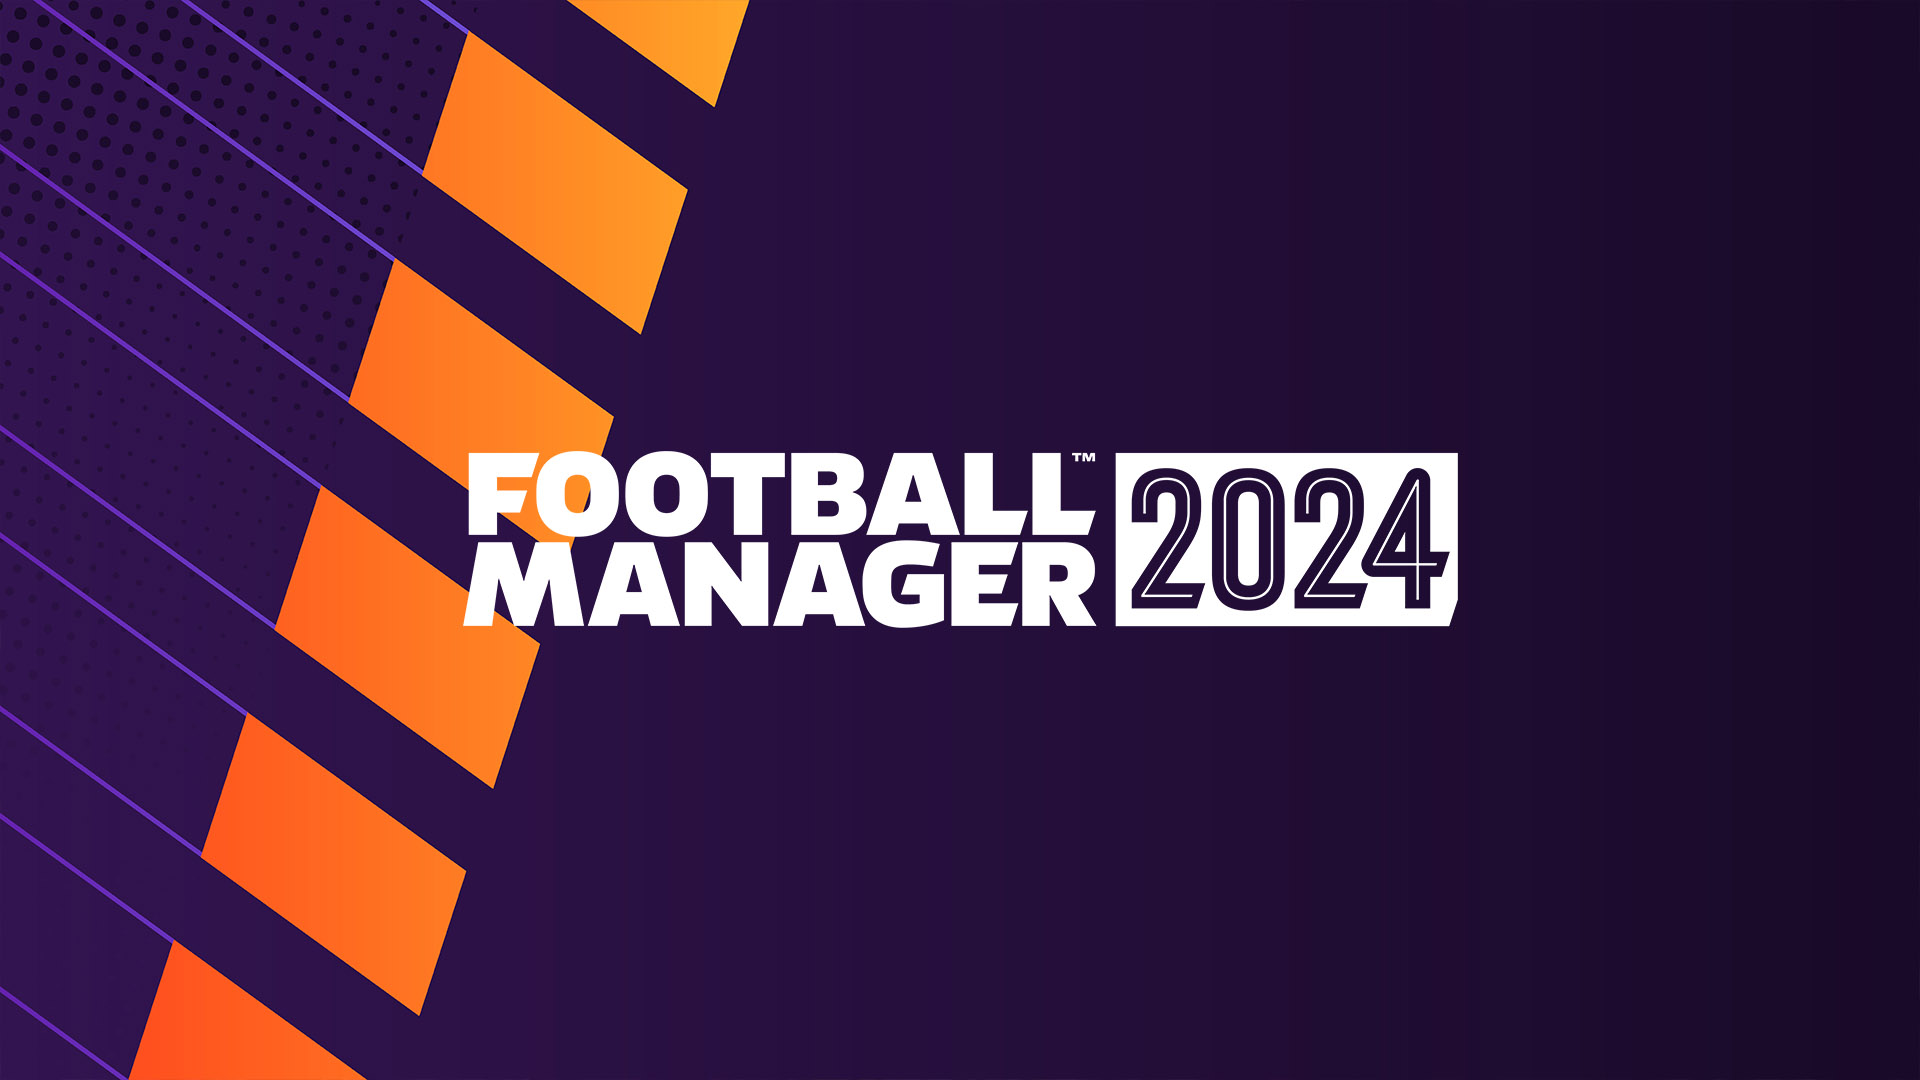 Football Manager 2024 Released: The Most Complete Edition In The